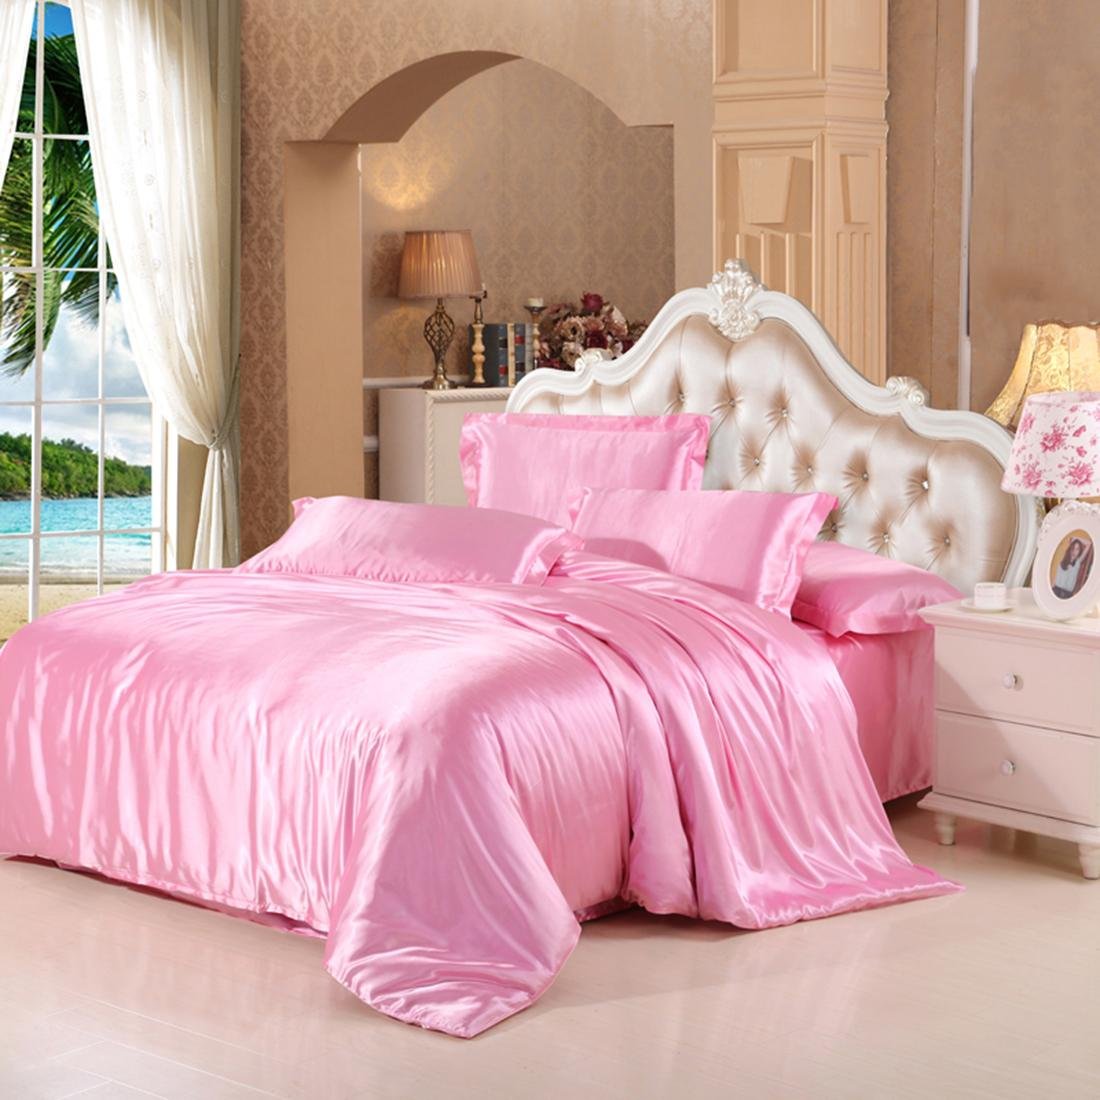 24 Inch Pocket Sheet Set Mulberry Sateen Silk Baby Blush Pink at-www.egyptianhomelinens.com